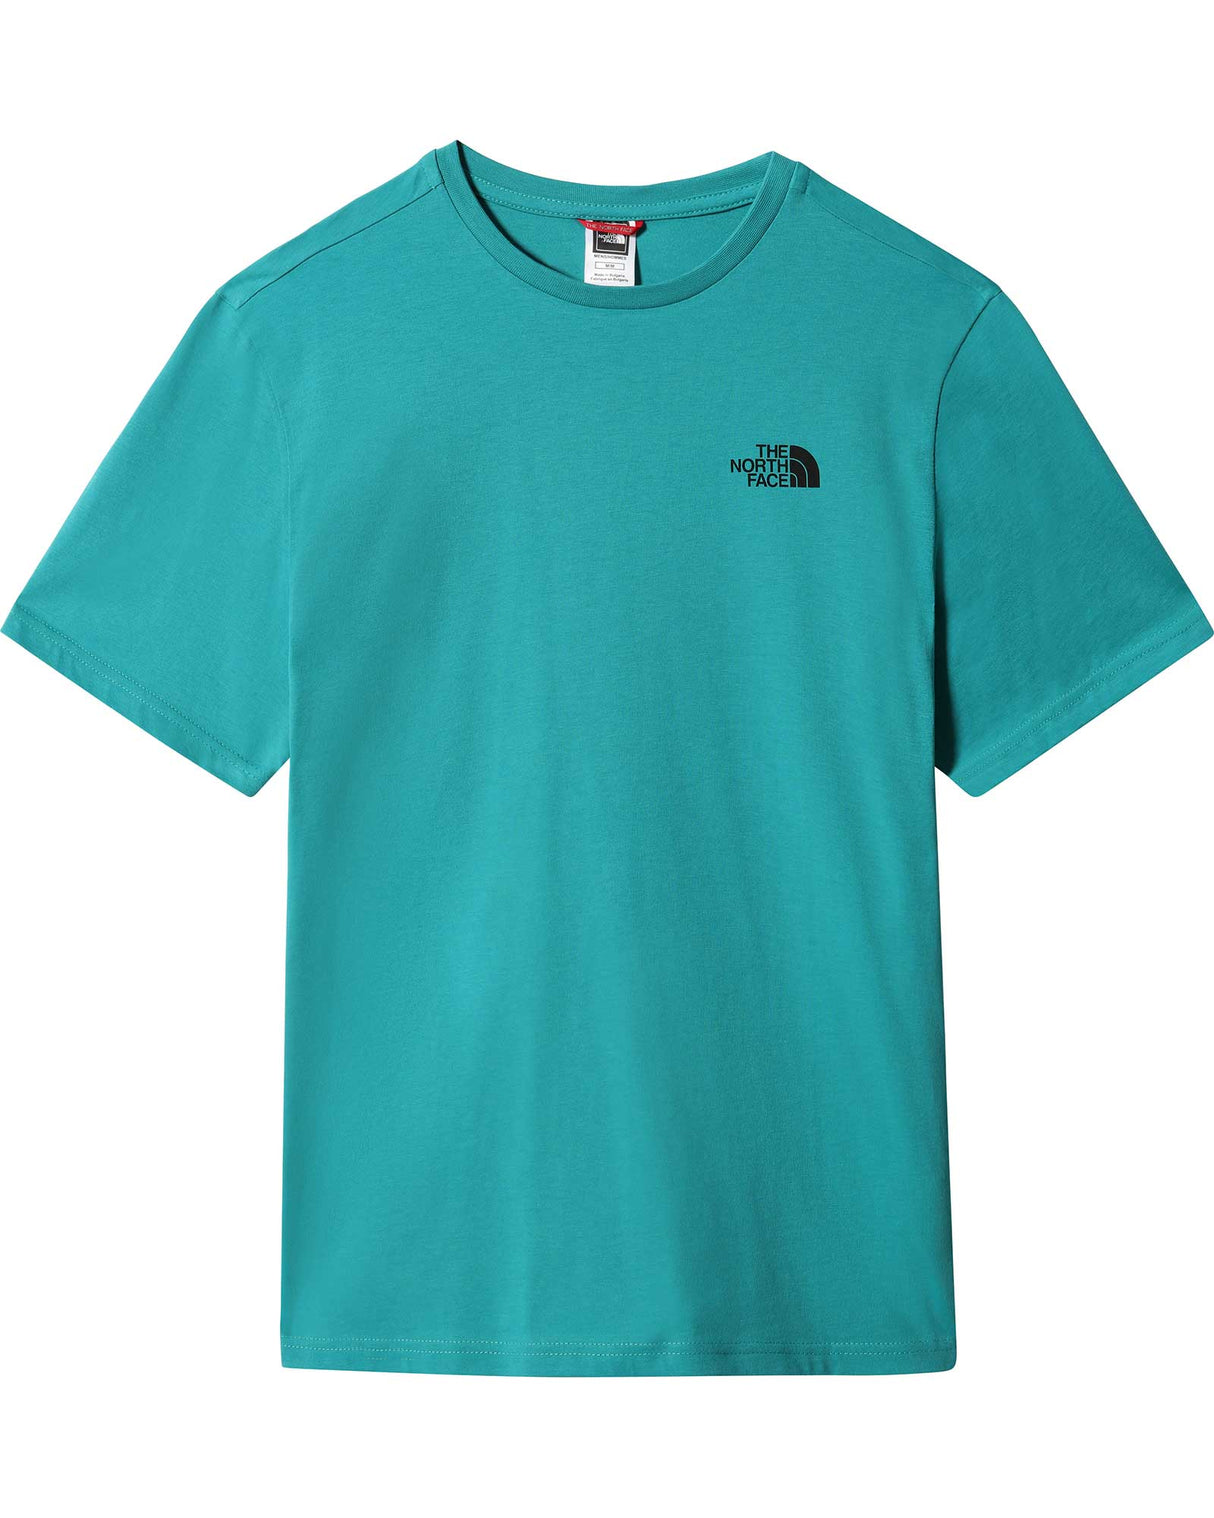 The North Face Short Sleeve Simple Dome T-Shirt in Porcelain Green